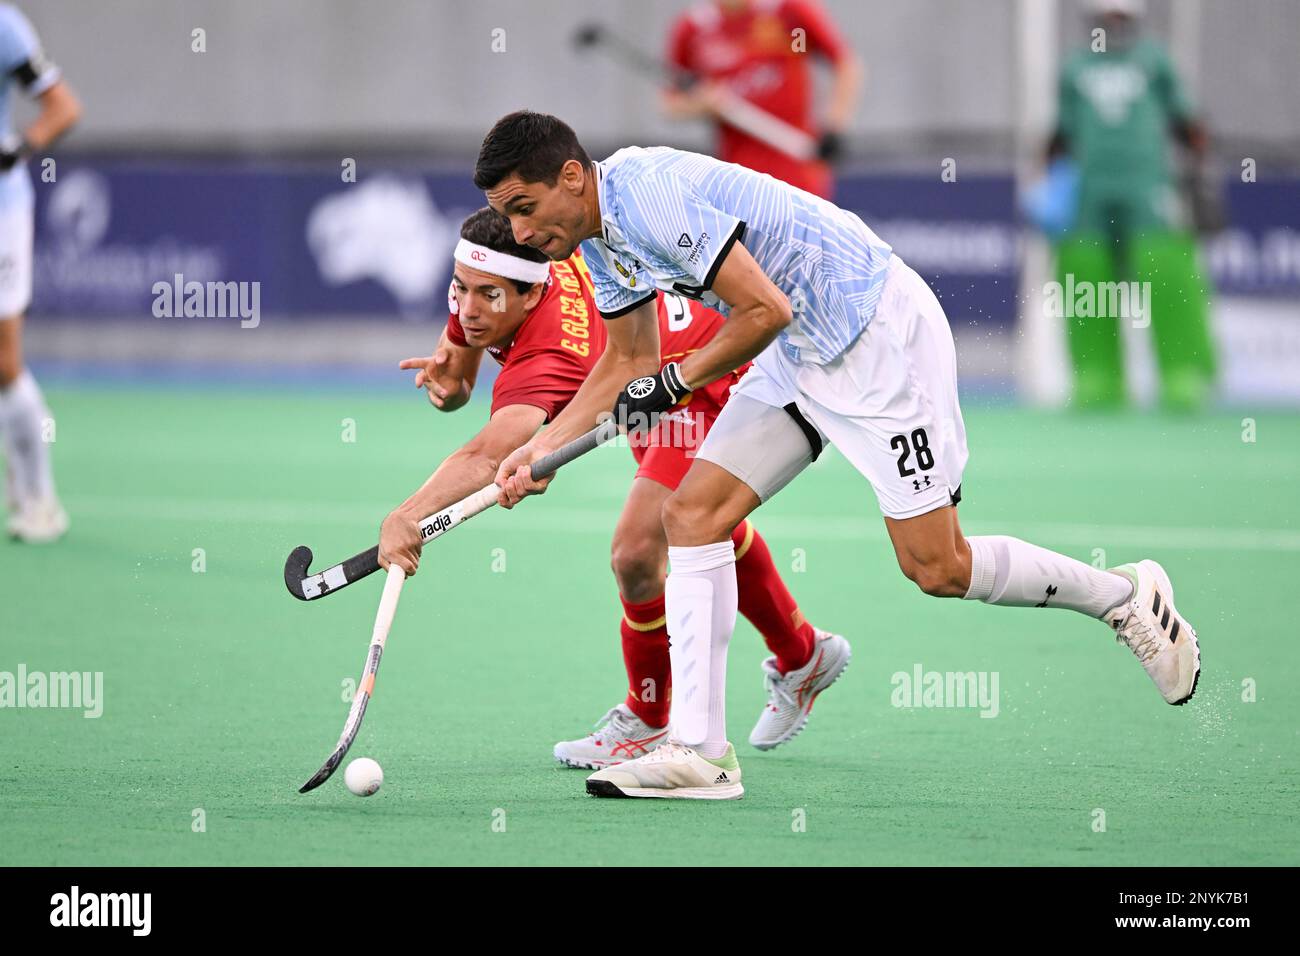 Hobart, Australia. 02nd Mar, 2023. Enrique González (L) of USA Men's National field hockey team and Federico Fernandez (R) of Argentina Men's National field hockey team in action during the 2022/23 International Hockey Federation (FIH) Men's Pro-League match between Argentina and Spain held at the Tasmanian Hockey Centre in Hobart. Final score Spain 4:3 Argentina. (Photo by Luis Veniegra/SOPA Images/Sipa USA) Credit: Sipa USA/Alamy Live News Stock Photo